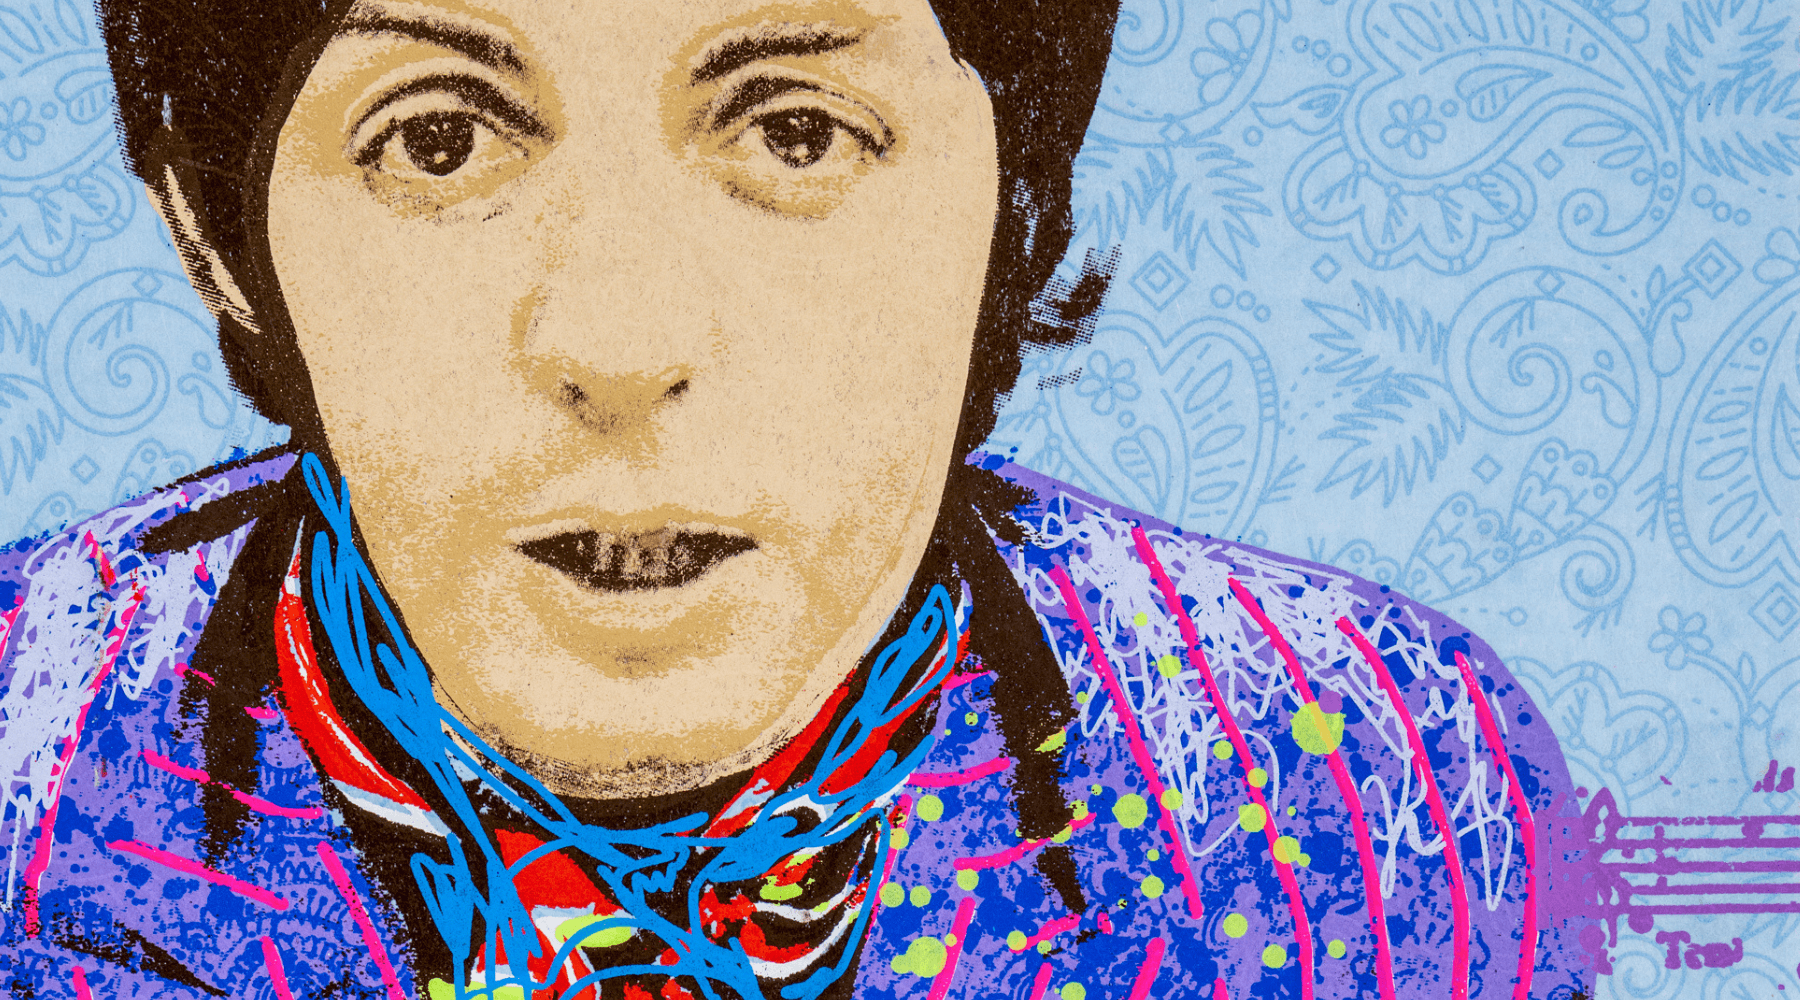 Paul McCartney Collaboration with Renowed English Rock and Roll Photographer Gered Mankowitz